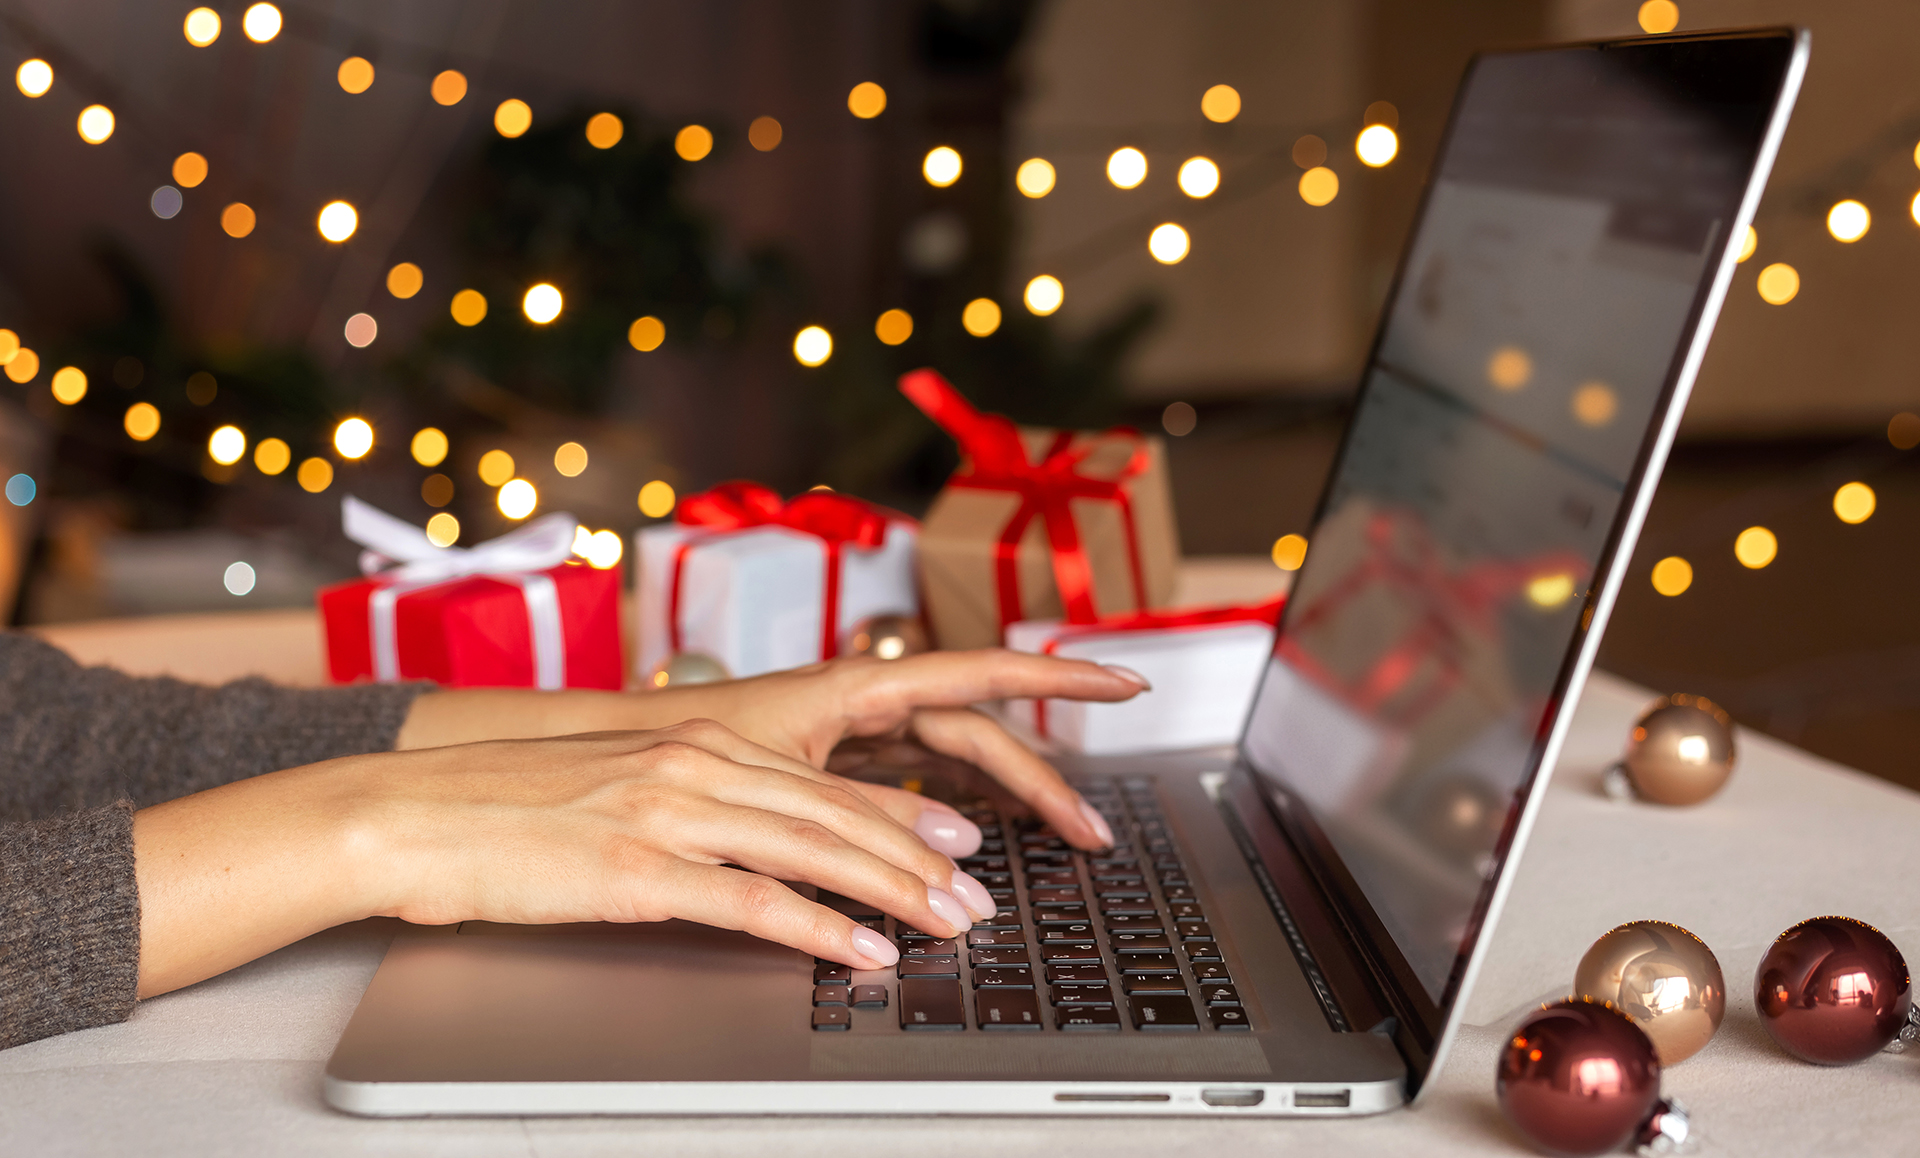 10 Hot Ways To Boost Your Web Sales Through the Holidays